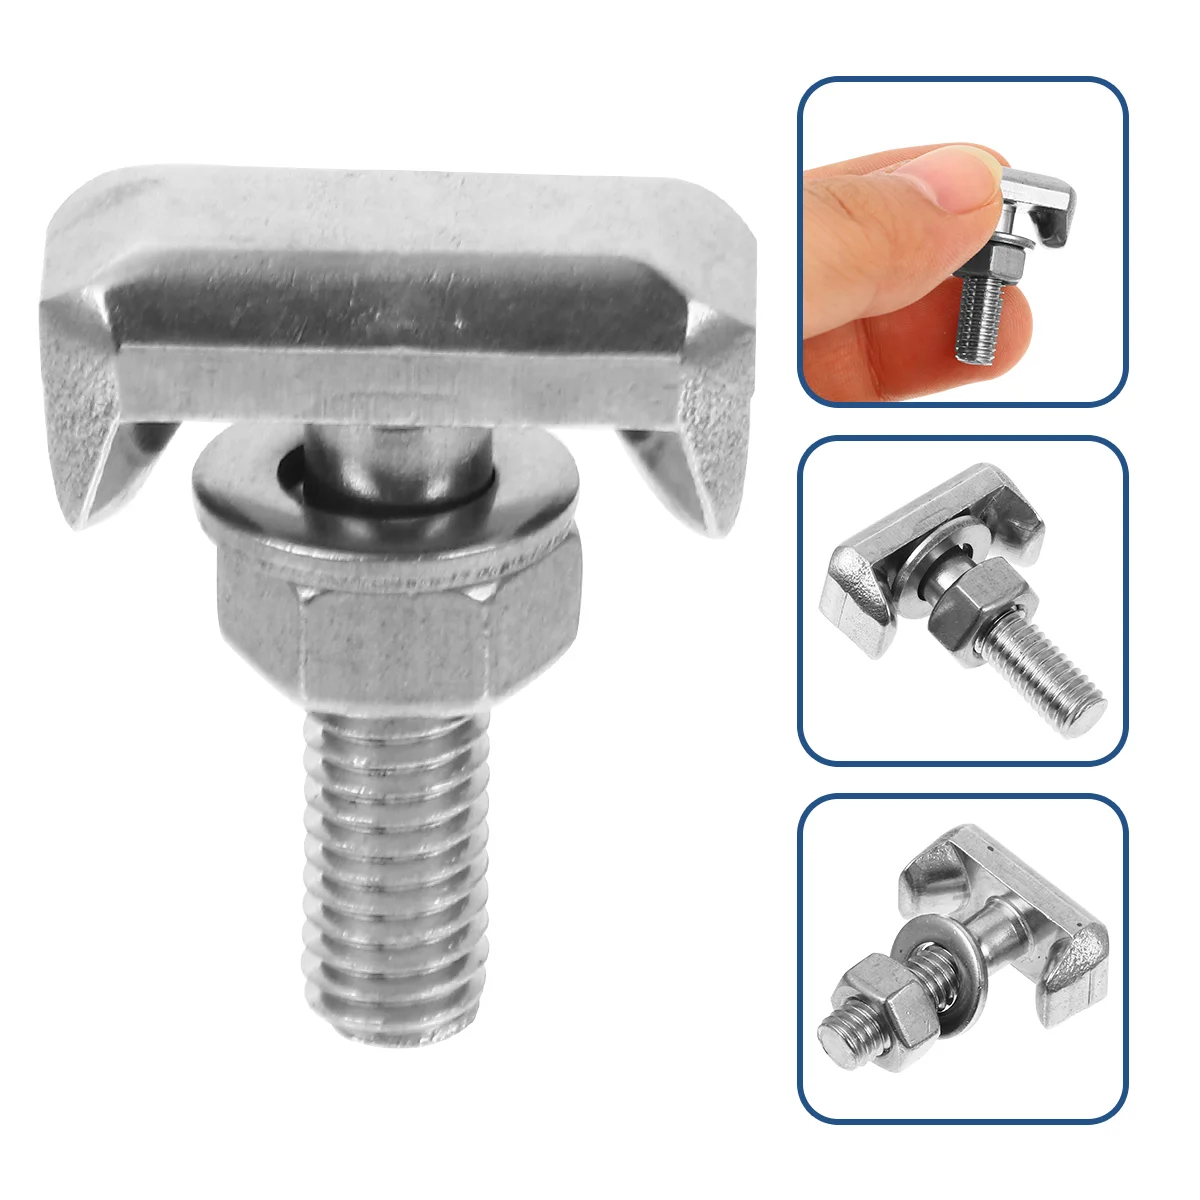 

2 Pcs T Bolt Nut Car Batteries Car Terminal Bolt Bolts Nuts Cable Terminal Stainless Steel Car Screw